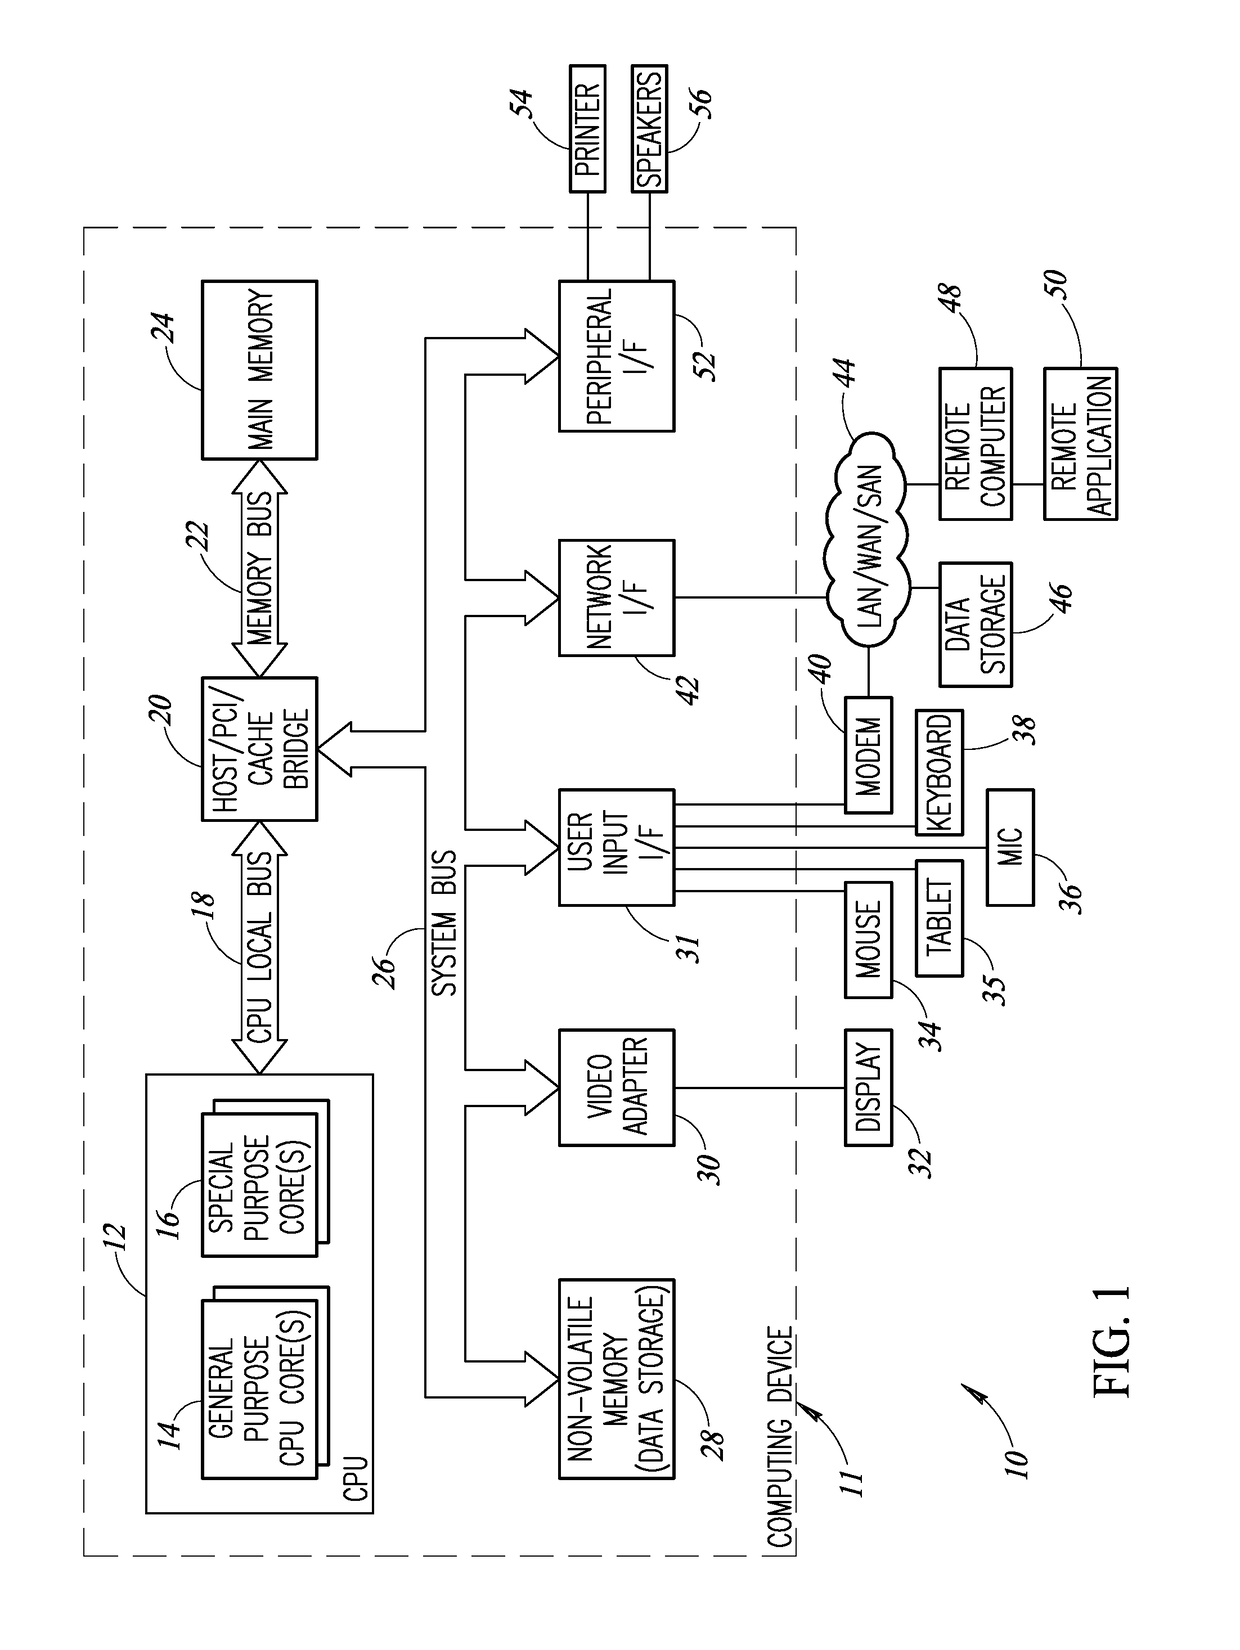 Neural Network Processing Element Incorporating Compute And Local Memory Elements